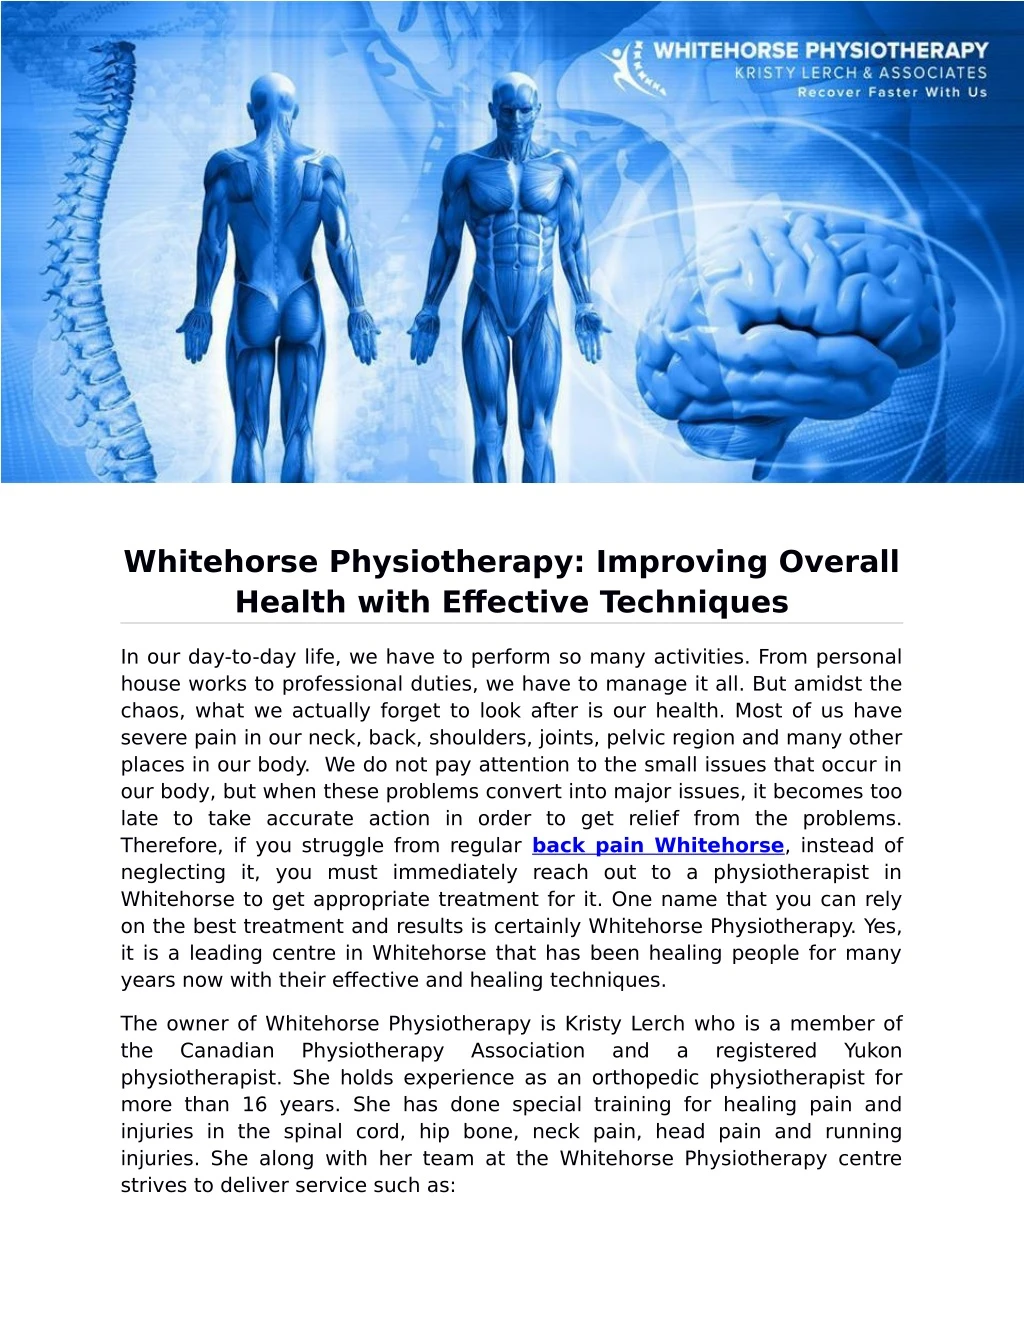 whitehorse physiotherapy improving overall health